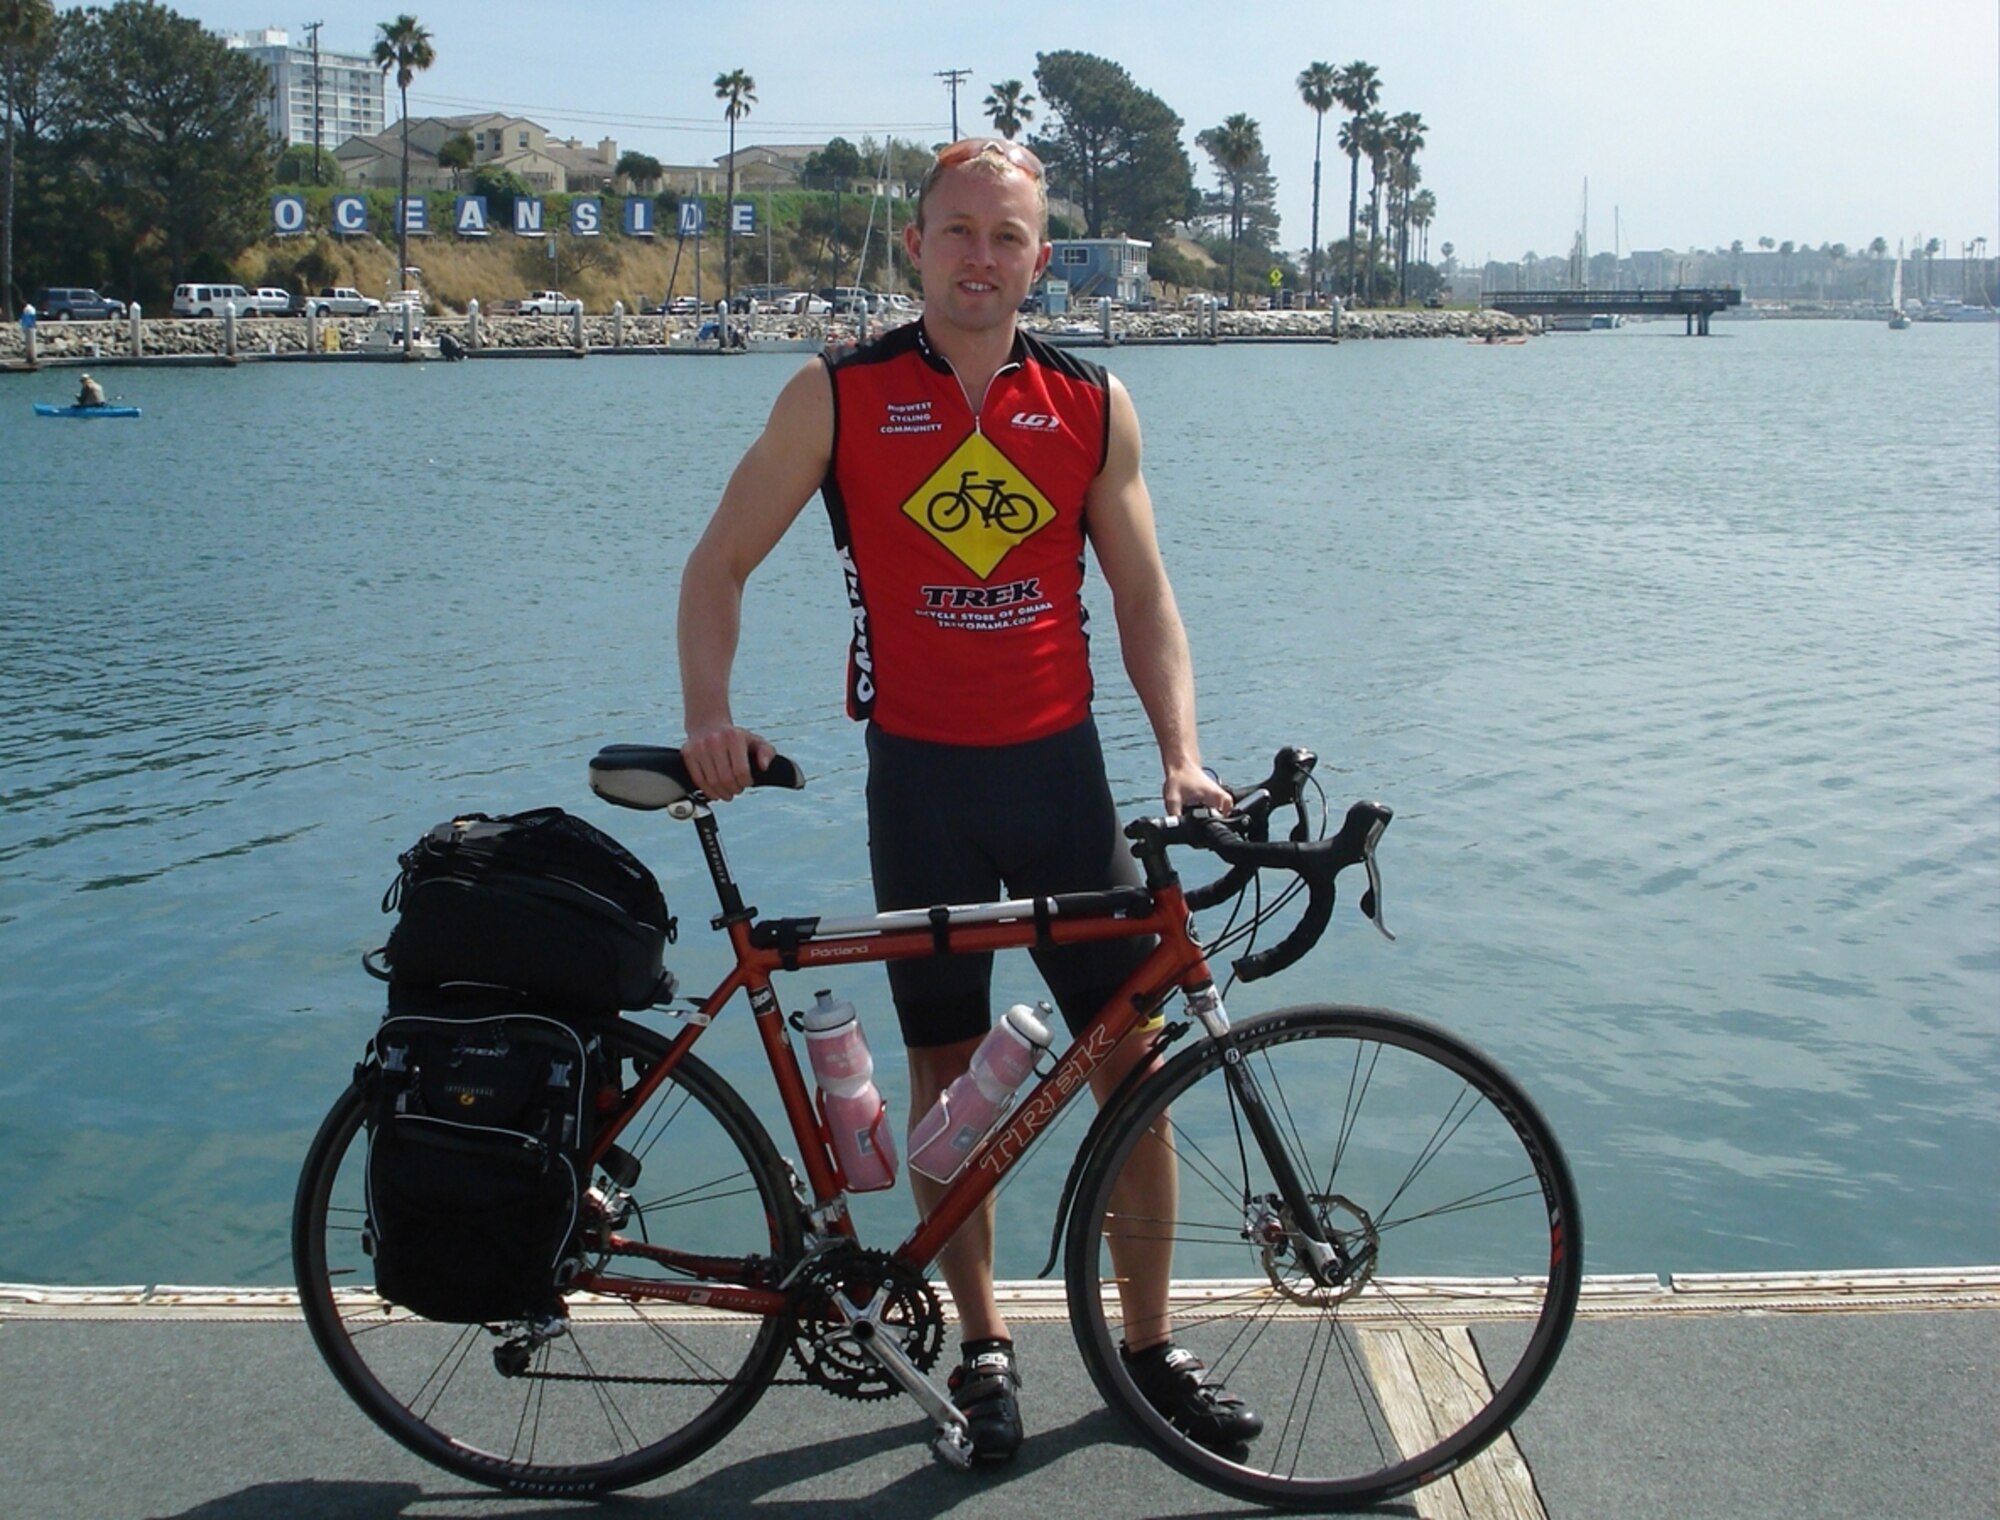 Navy Lt. Jeffrey Greene prepares to start his three-month journey in Oceanside, Calif., by dipping his bike tires in the Pacific Ocean. For more on the trip or to follow Lieutenant Greene’s progress, visit www.rideforred.com. (Courtesy Photo)